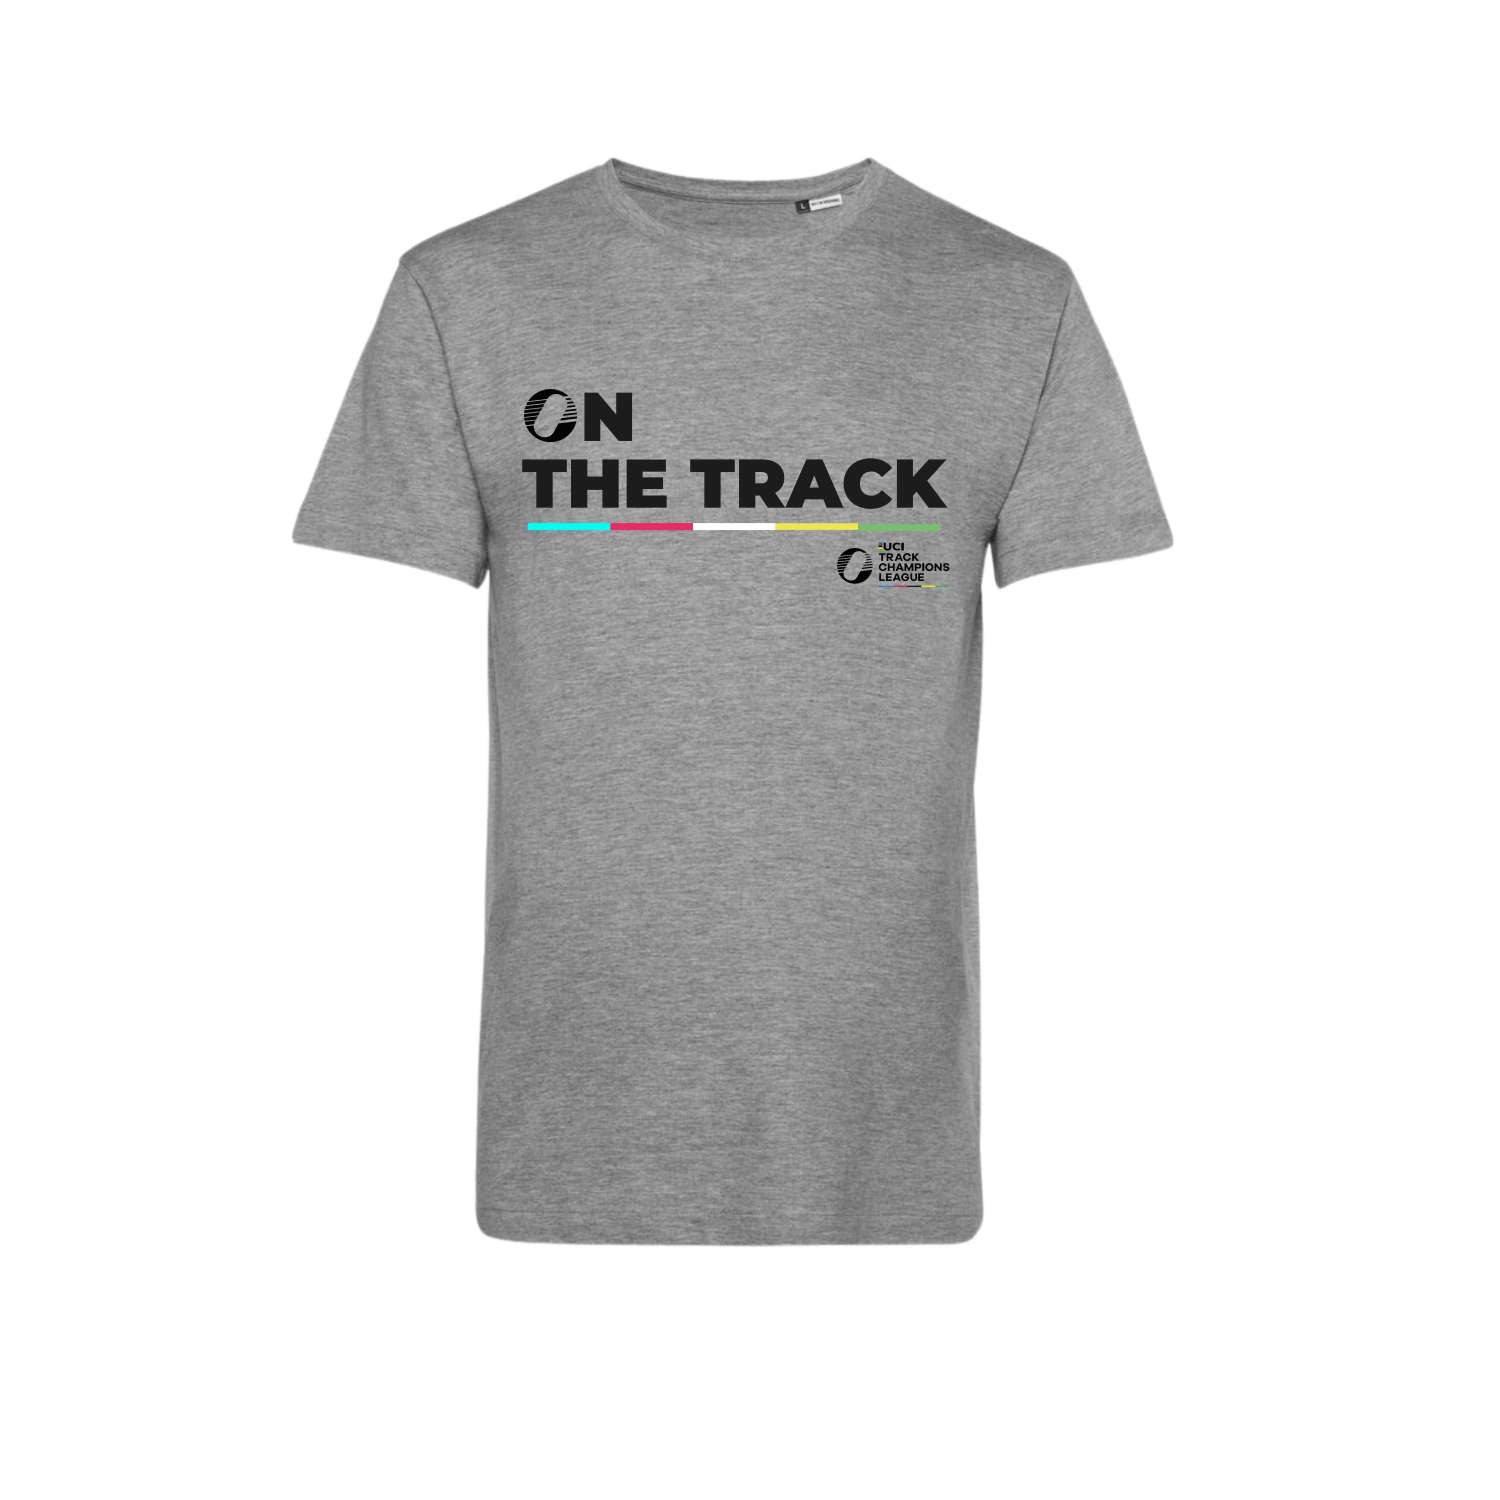 T-shirt UCI Track Champions League On The Track Mixte Gris